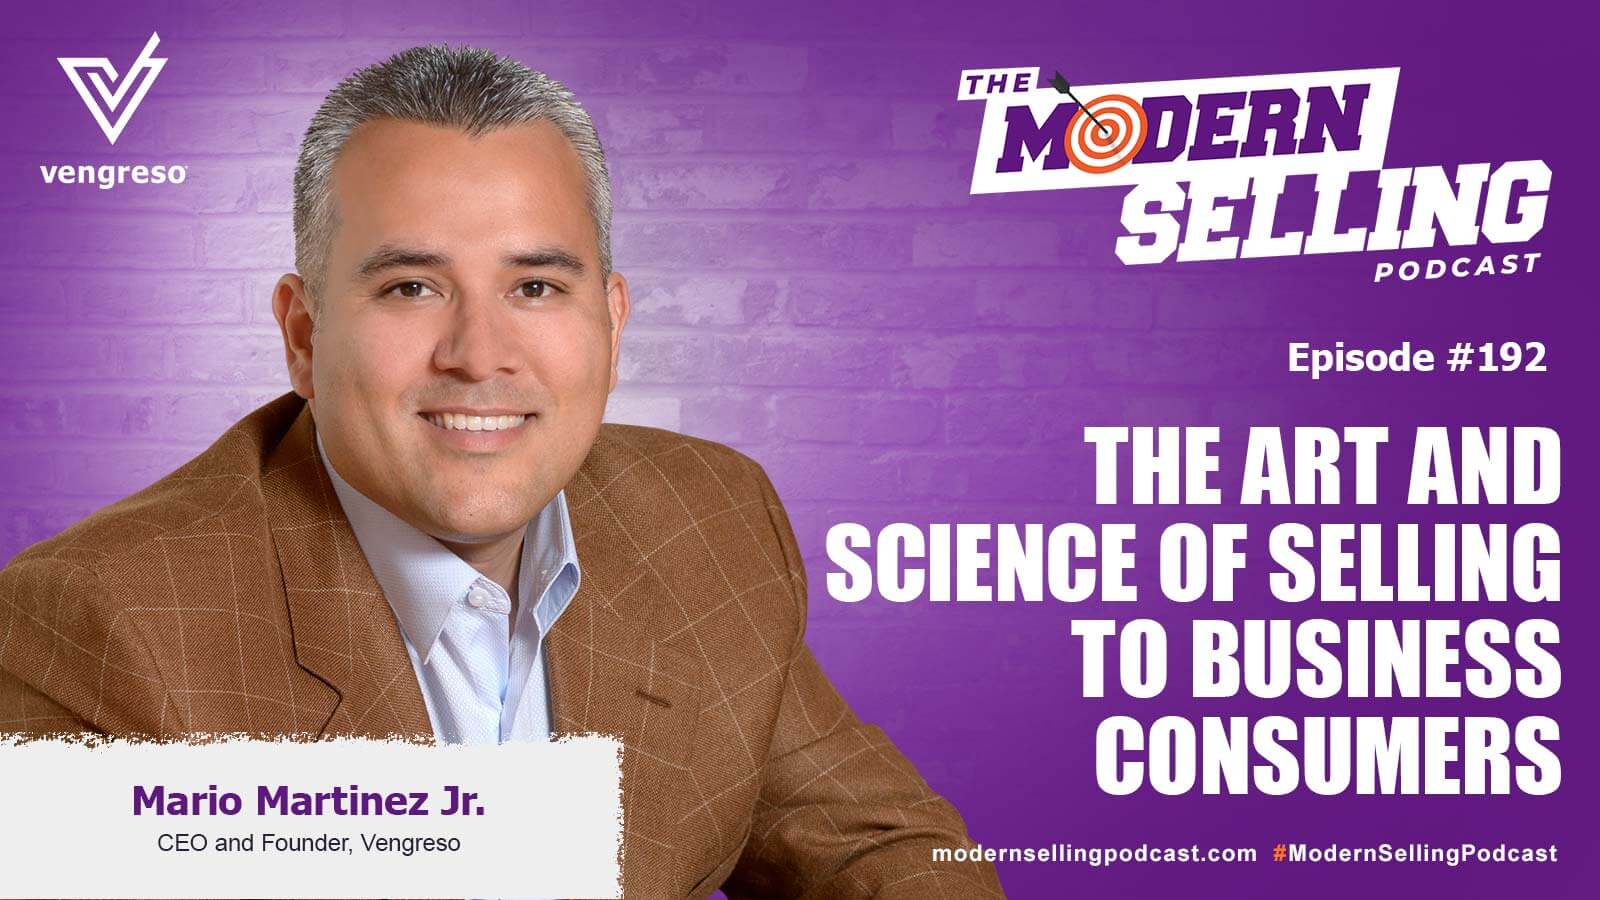 The Art and Science of Selling to Business Consumers Podcast